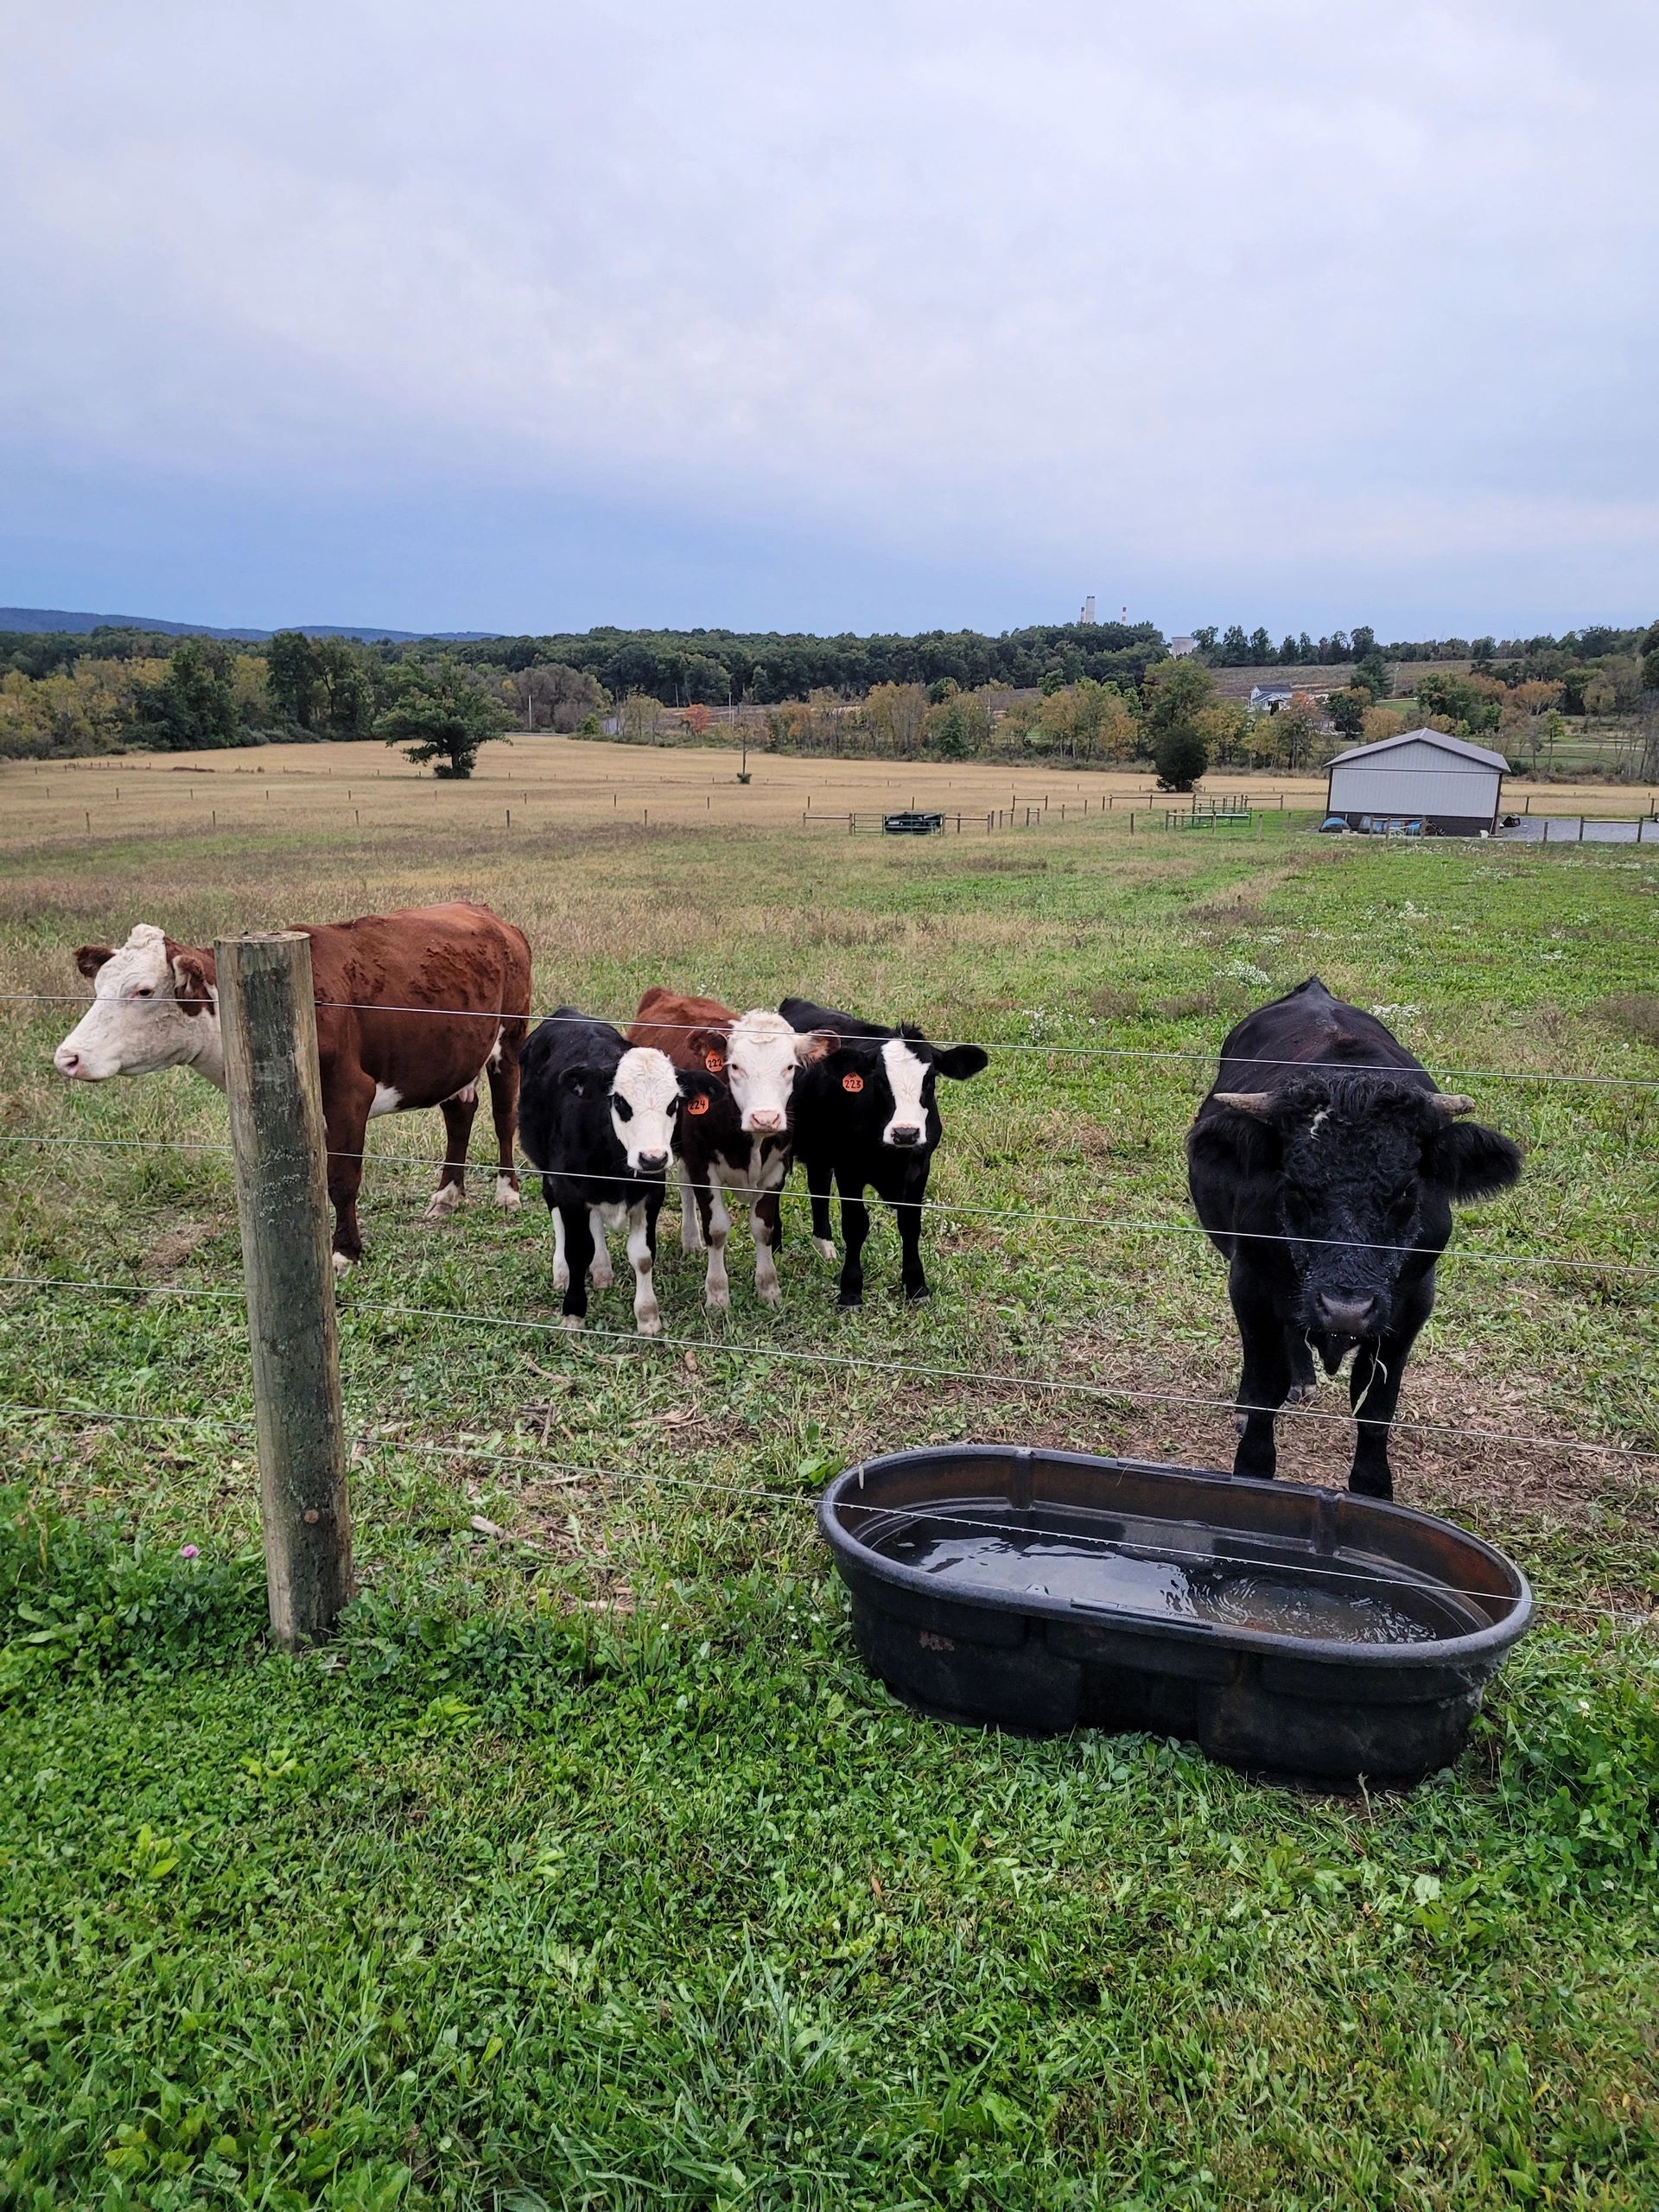 Our beef cows hanging out around the water tank.